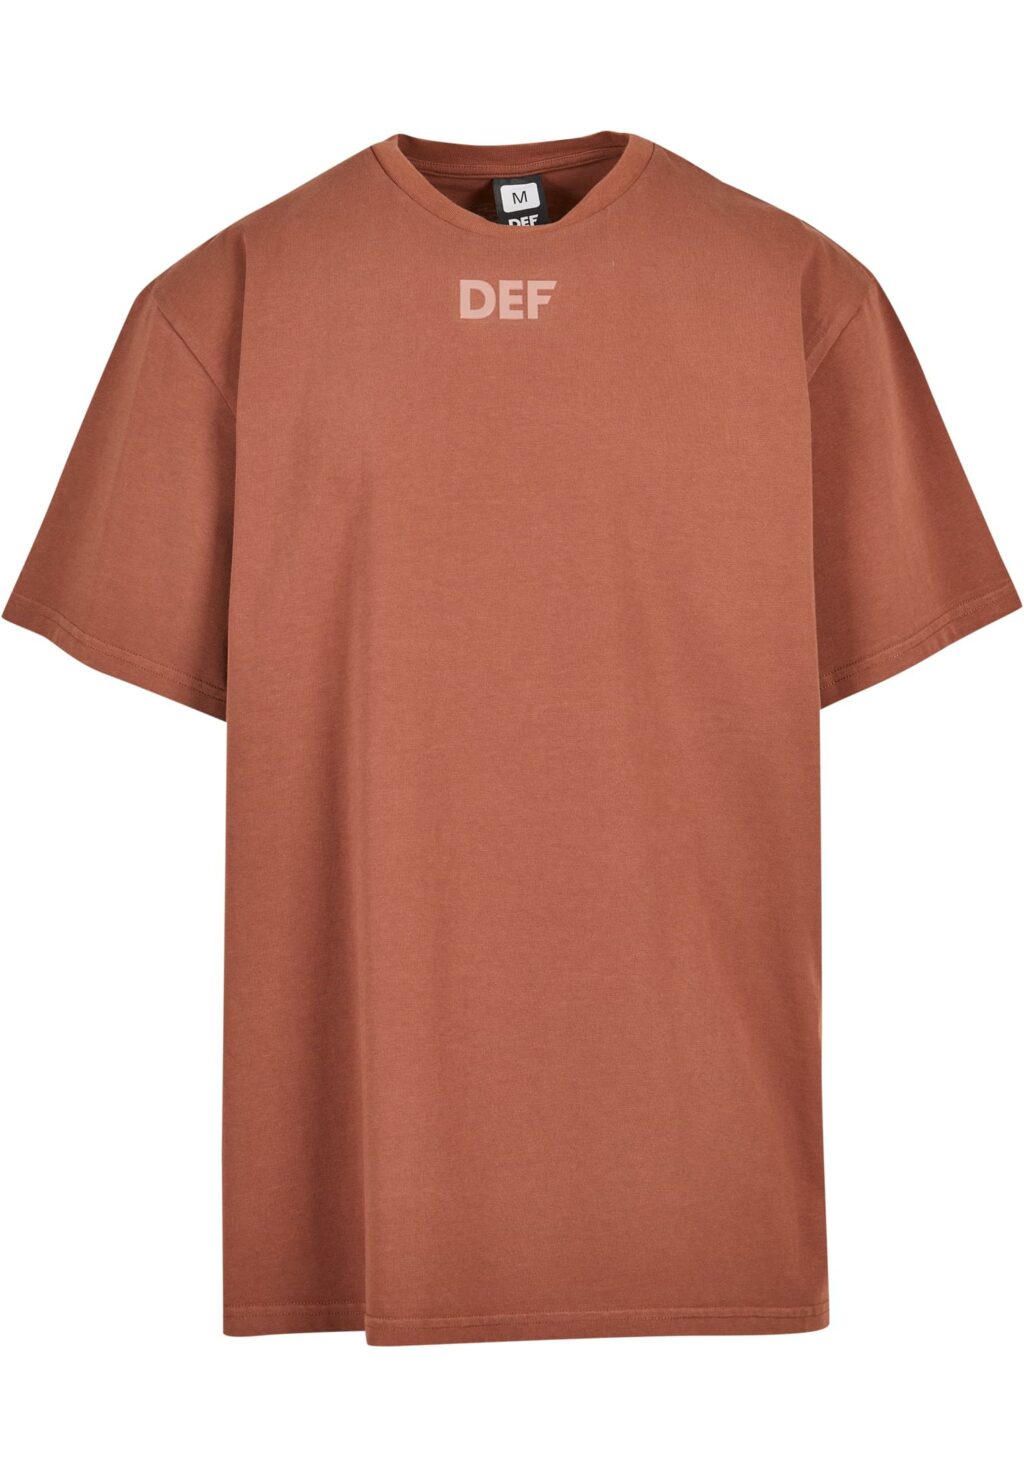 DEF Silicone Print T-Shirt brown DFTS215